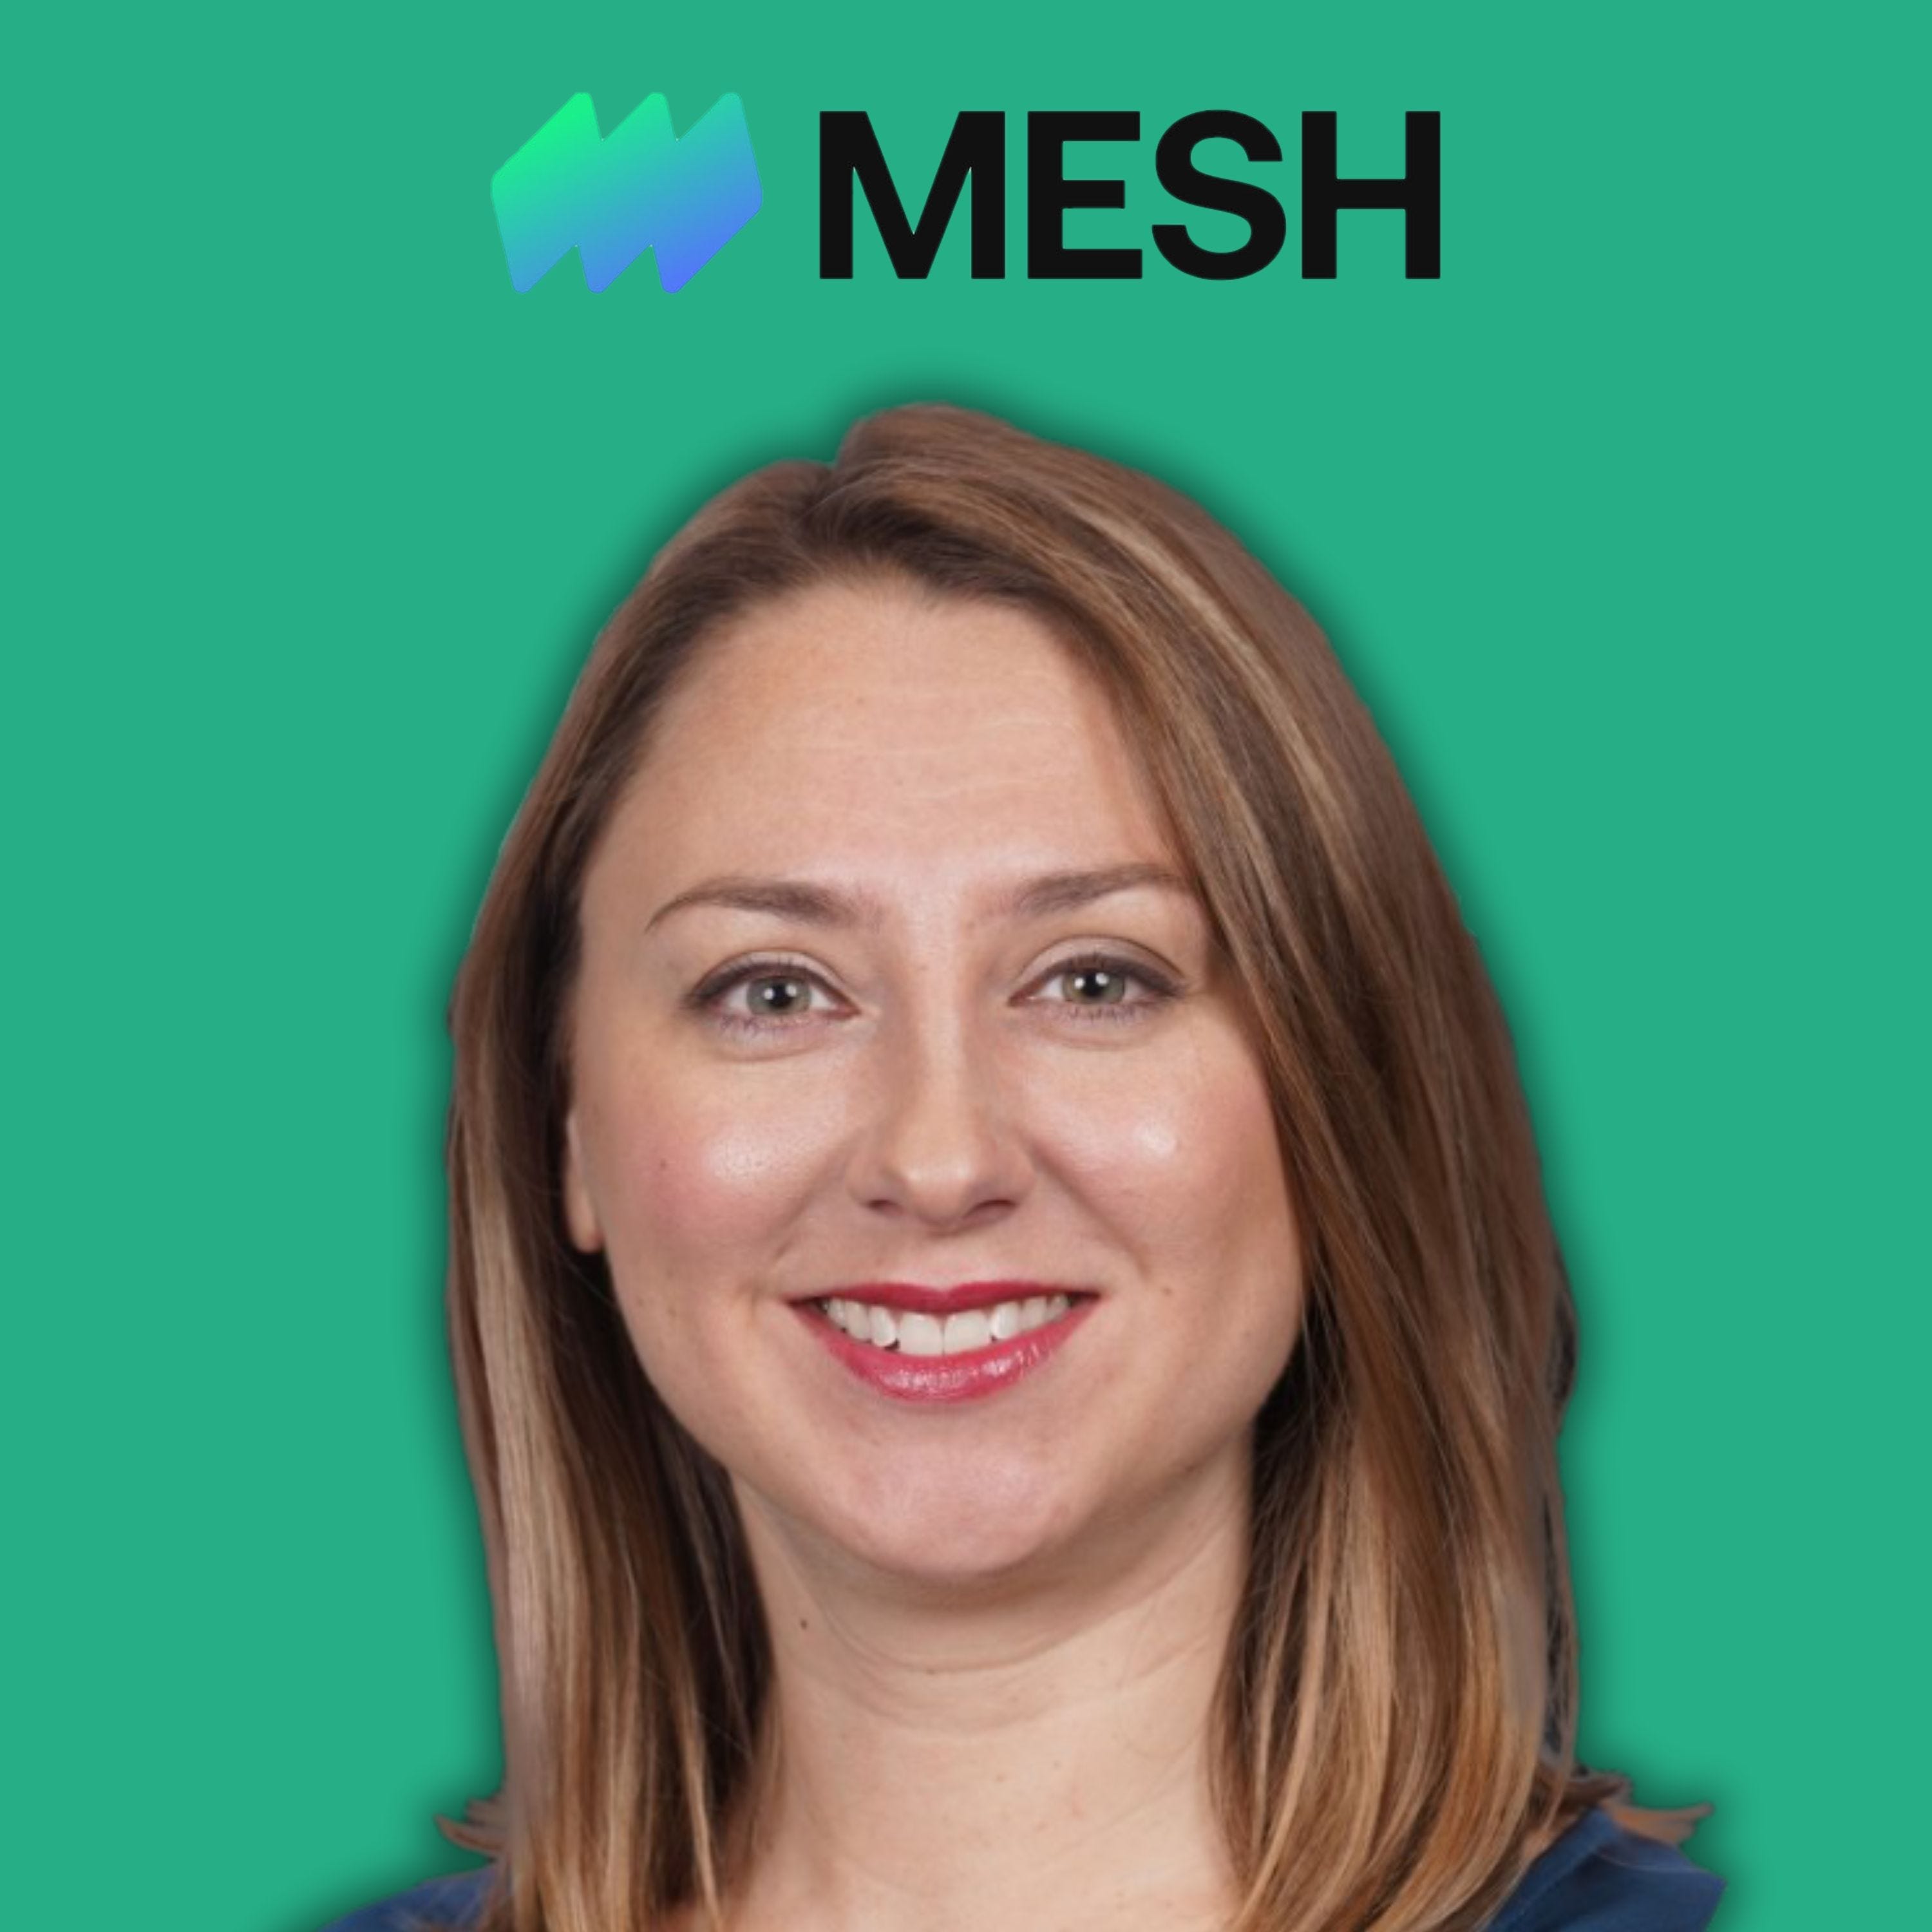 Automation, Storytelling, and the Future of Finance With Anna King, CFO of Mesh